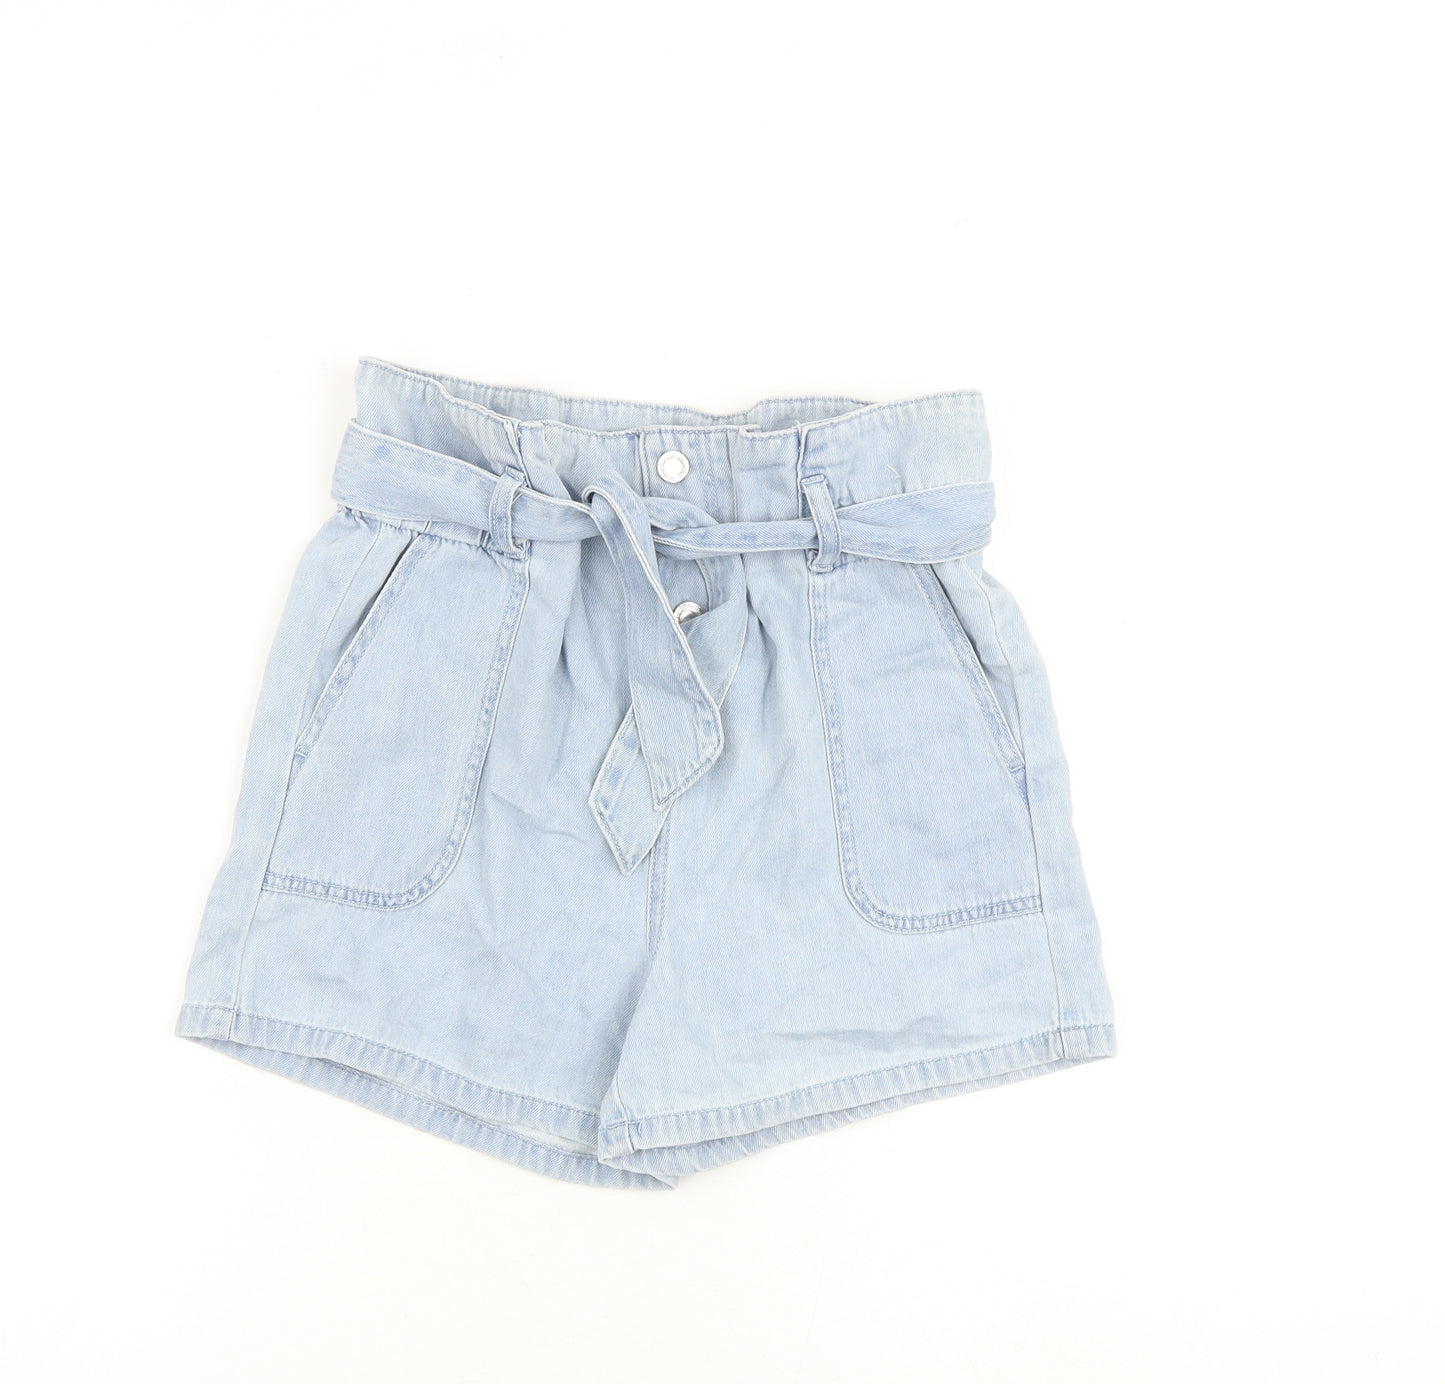 Denim & Co. Womens Blue Cotton Paperbag Shorts Size 6 L4 in Regular Button - Belted